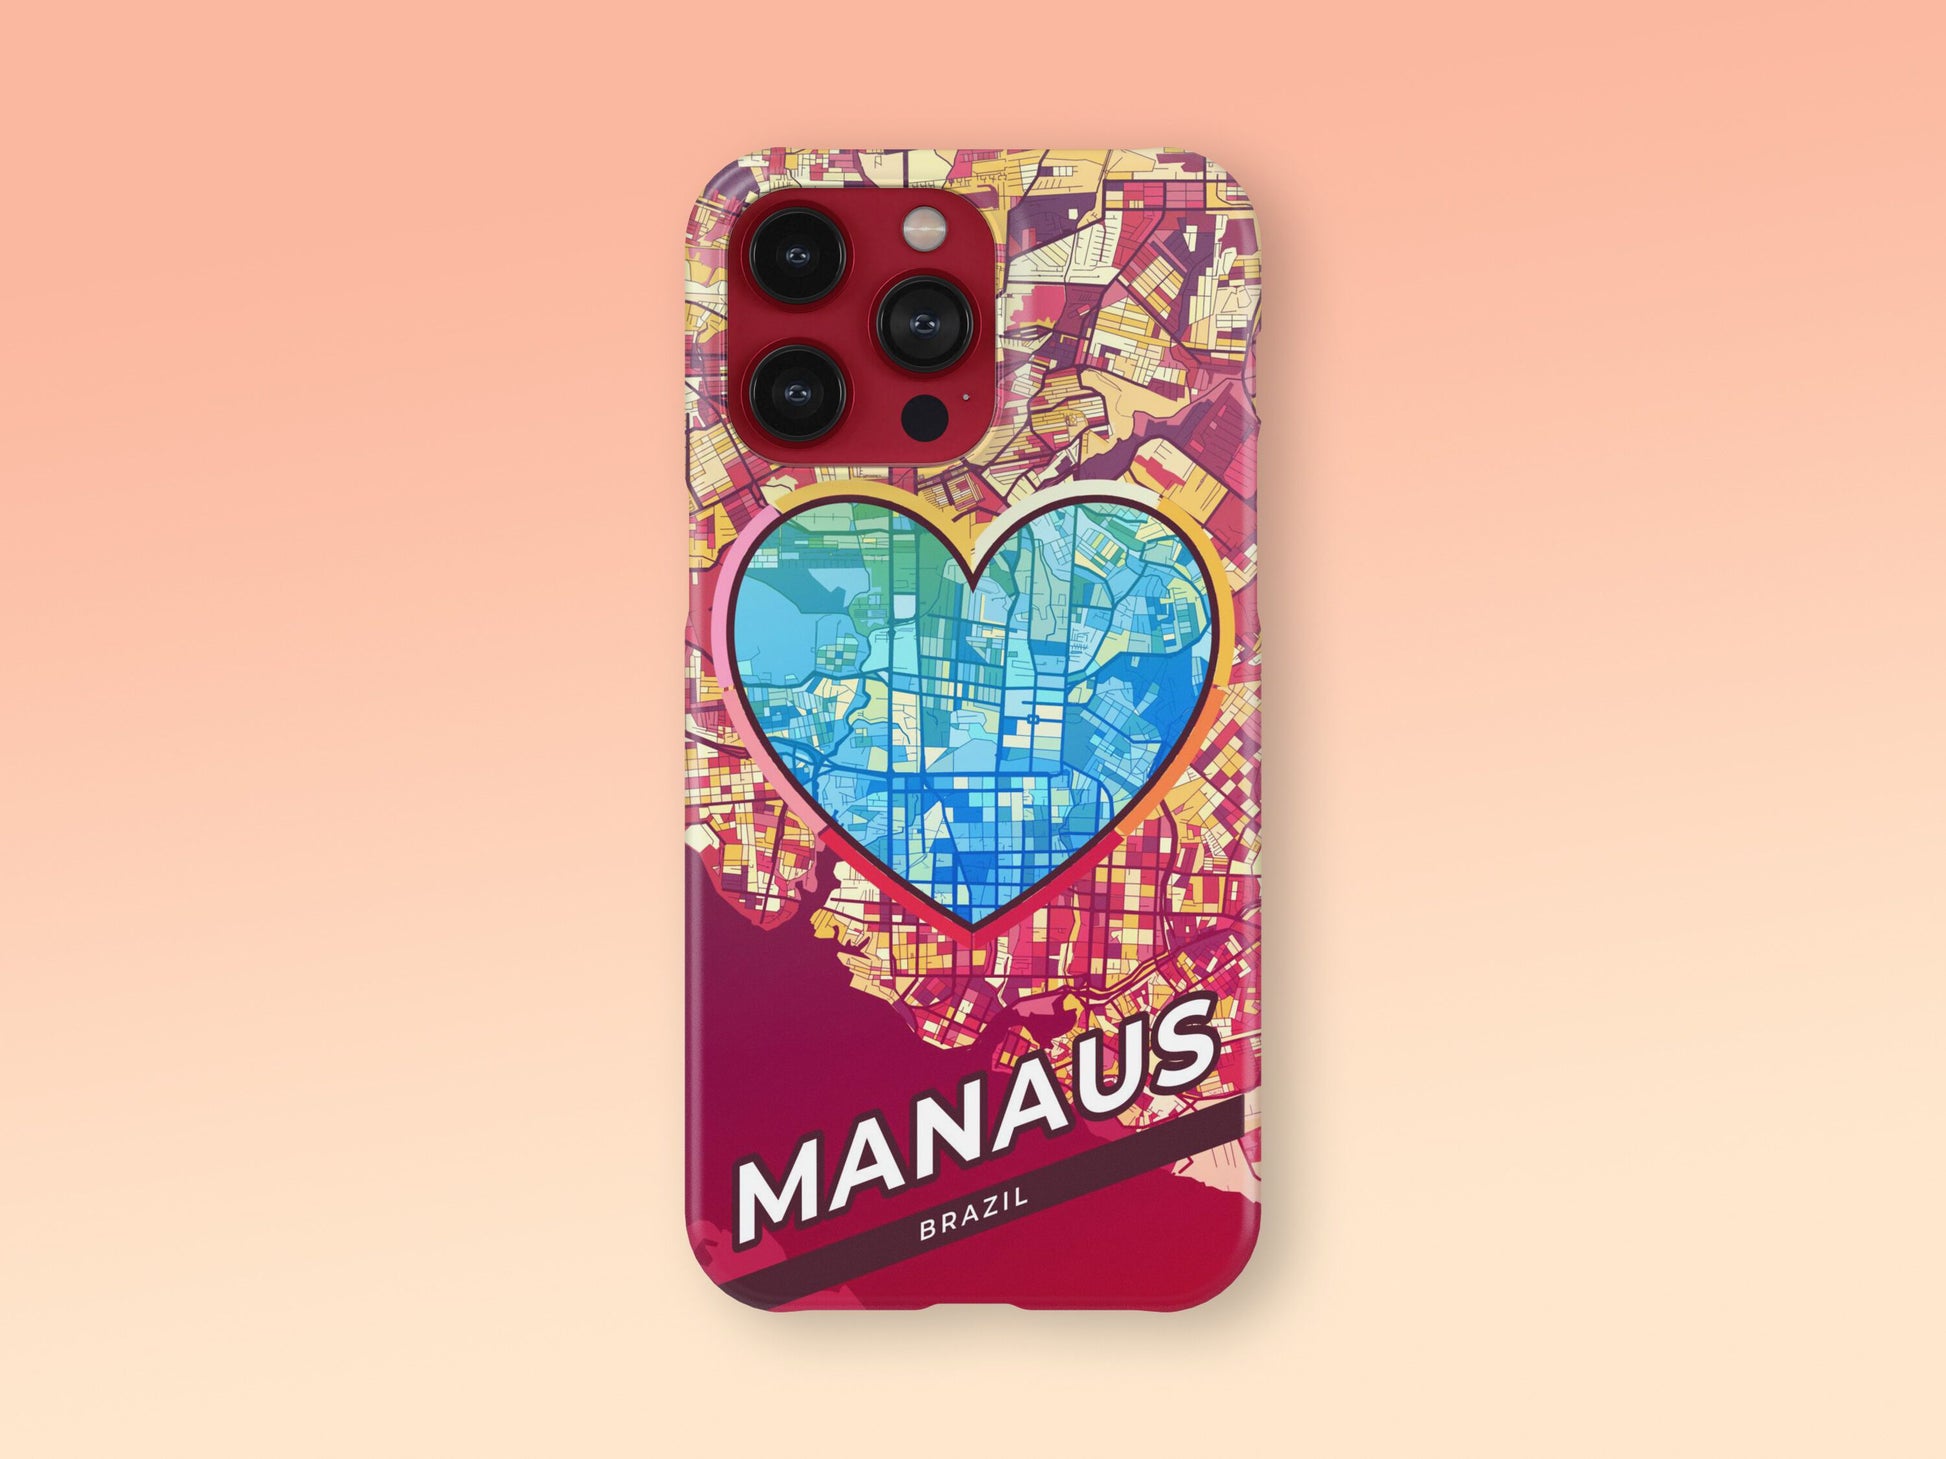 Manaus Brazil slim phone case with colorful icon. Birthday, wedding or housewarming gift. Couple match cases. 2